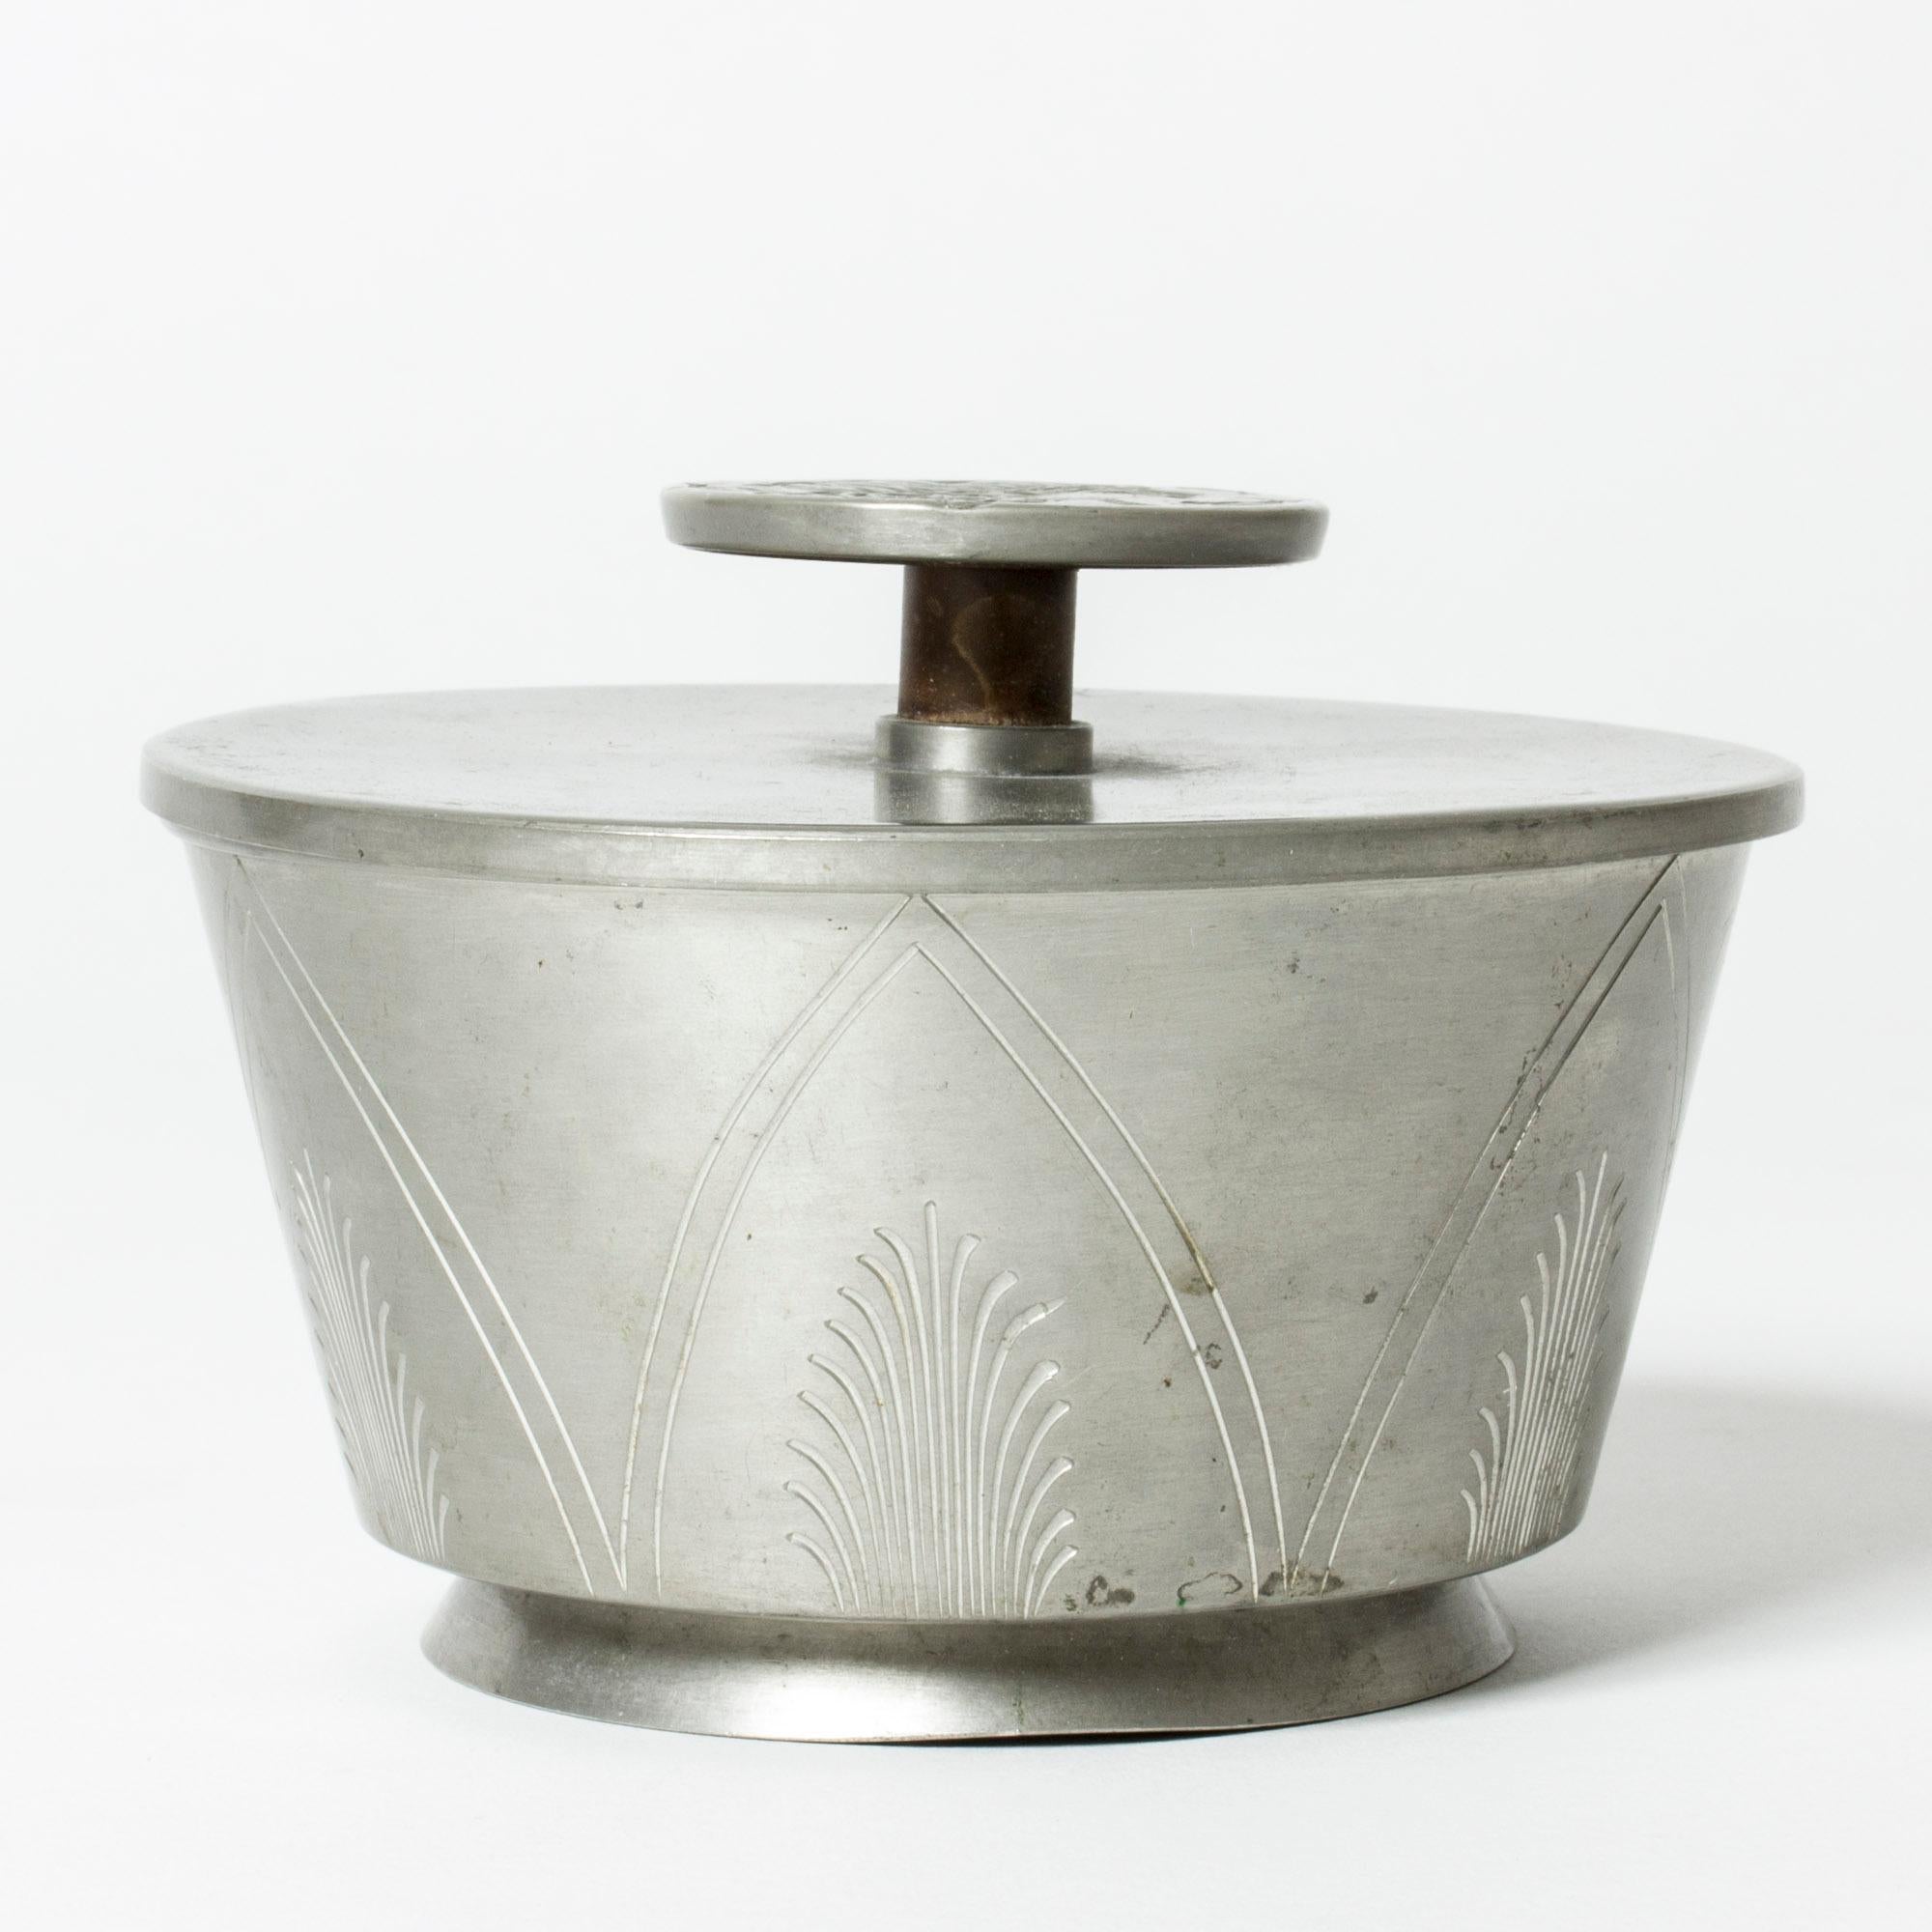 Pewter jar from Oscar Antonsson, in a beautiful design. Elevated knob on the lid, with a relief decor of a woman’s silhouette. Graphic, etched decor on the sides of the jar.